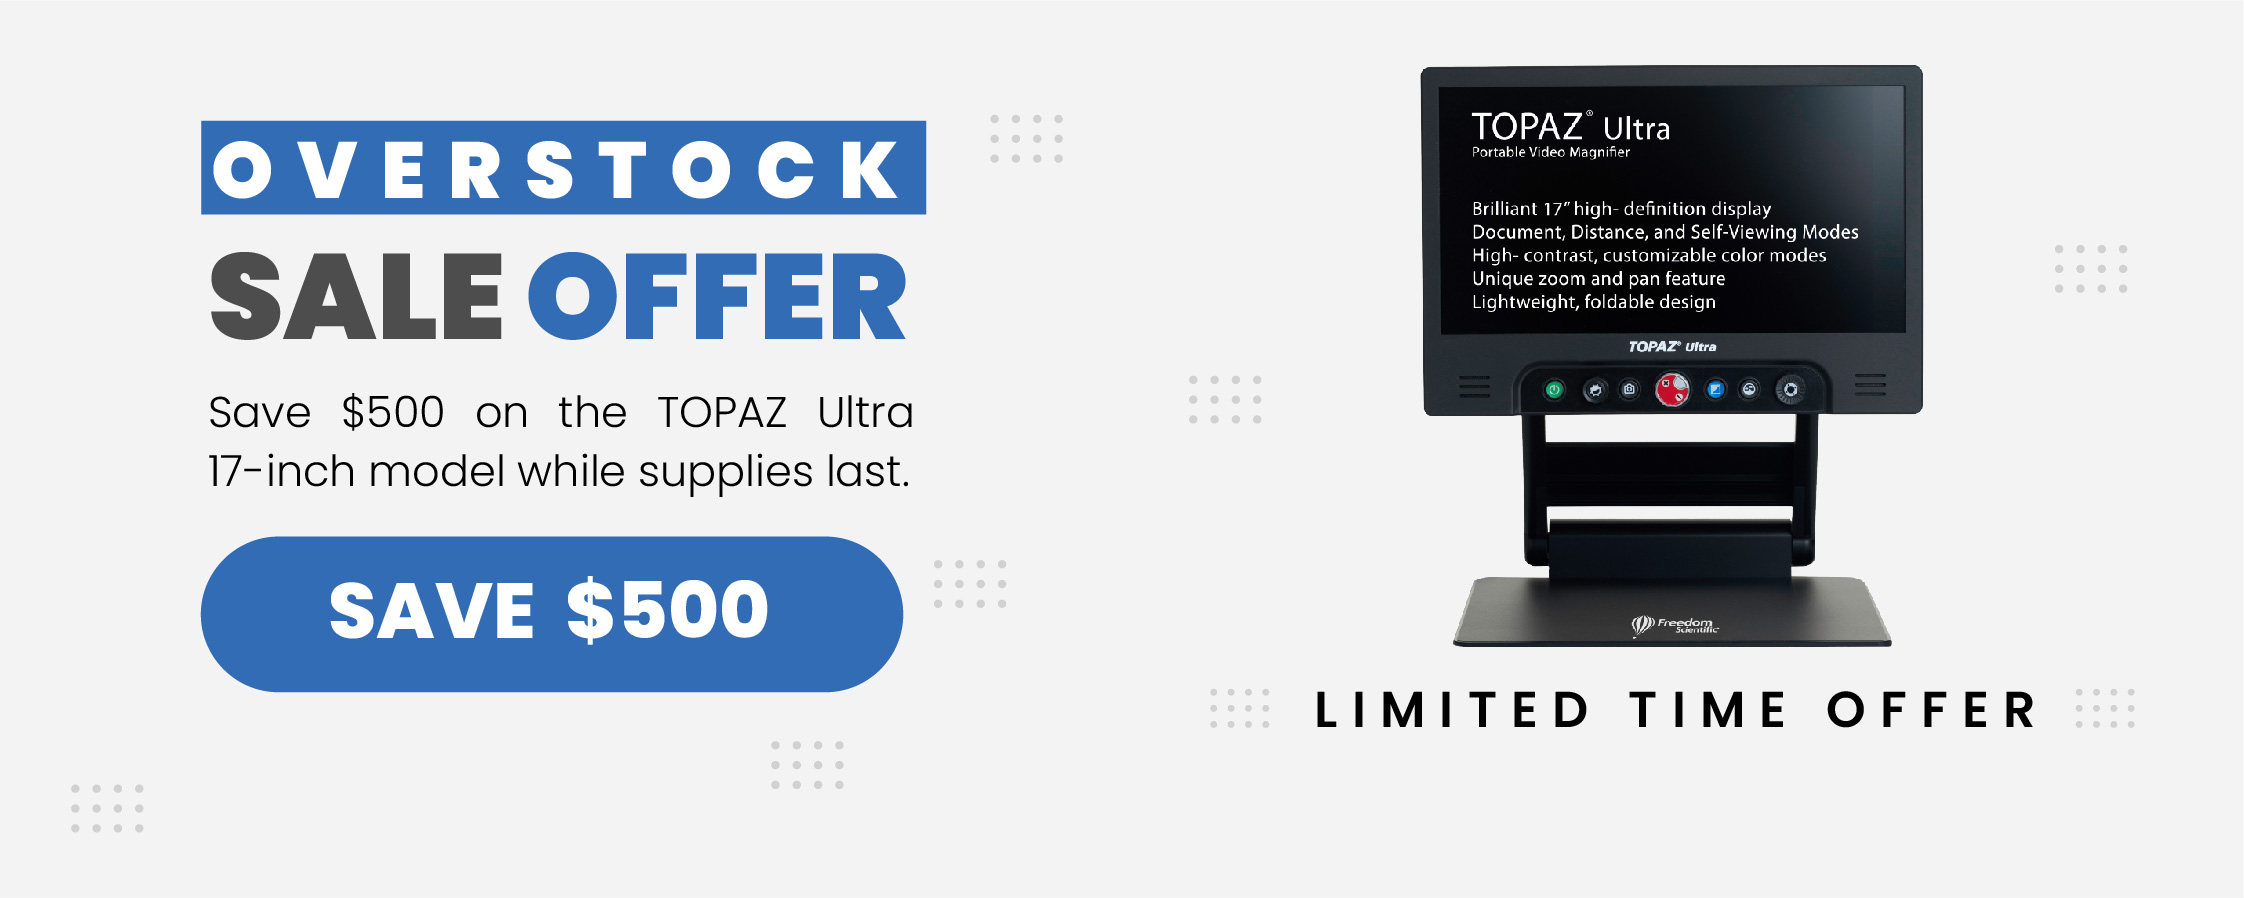 For a limited time, take $500 off the purchase of a TOPAZ Ultra 17-inch model. This offer is valid in the US, on new orders, while supplies last. Discount price automatically applied in shopping cart.